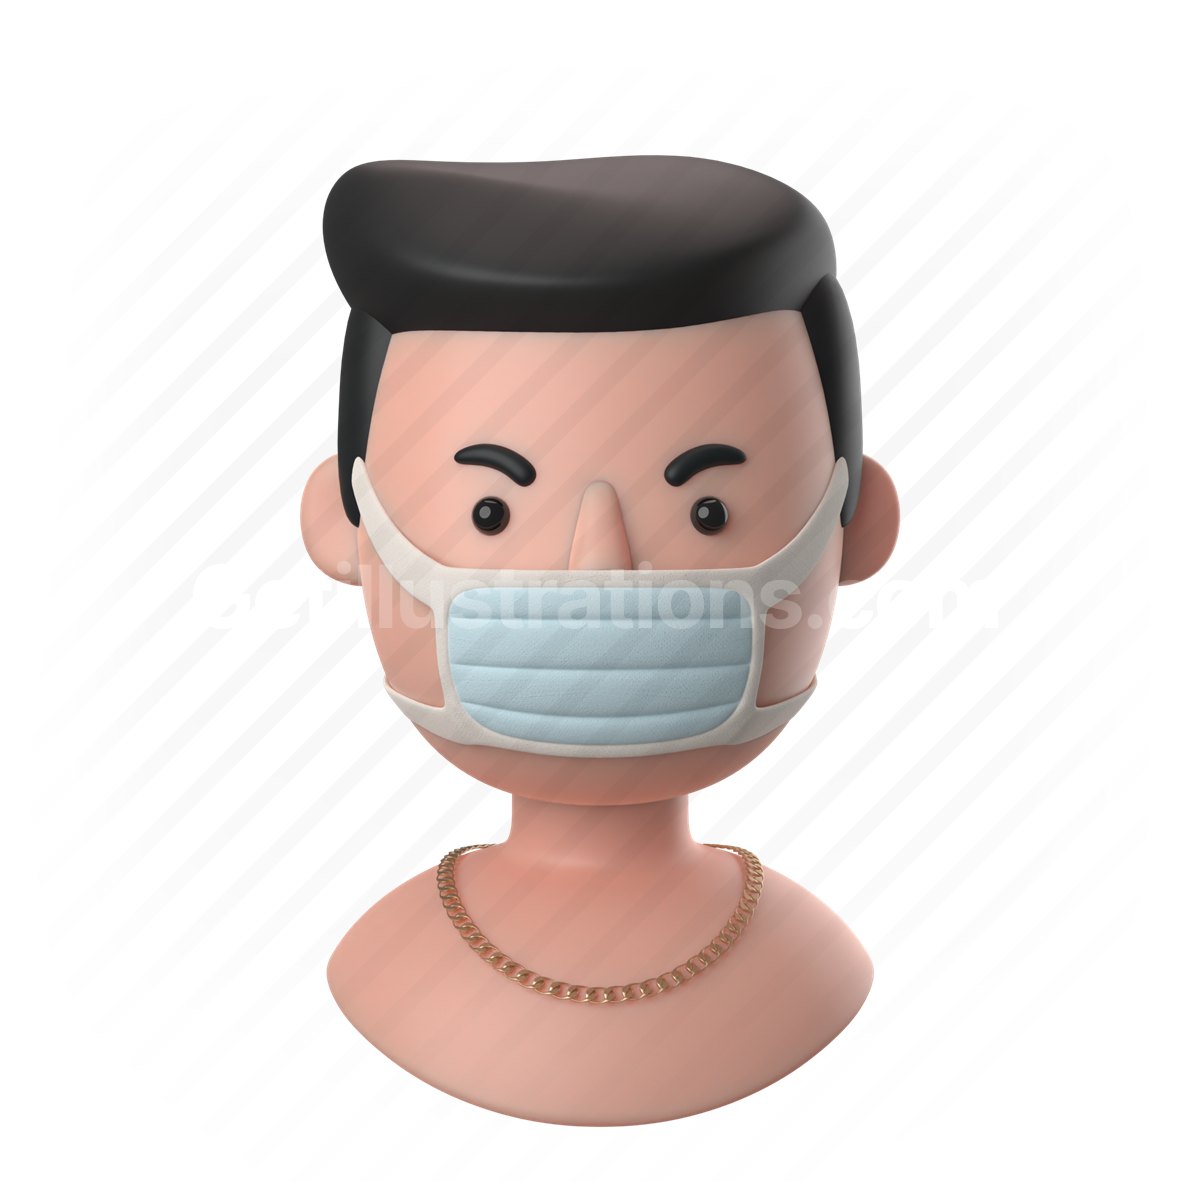 man, male, people, person, face mask, mask, shirtless, necklace